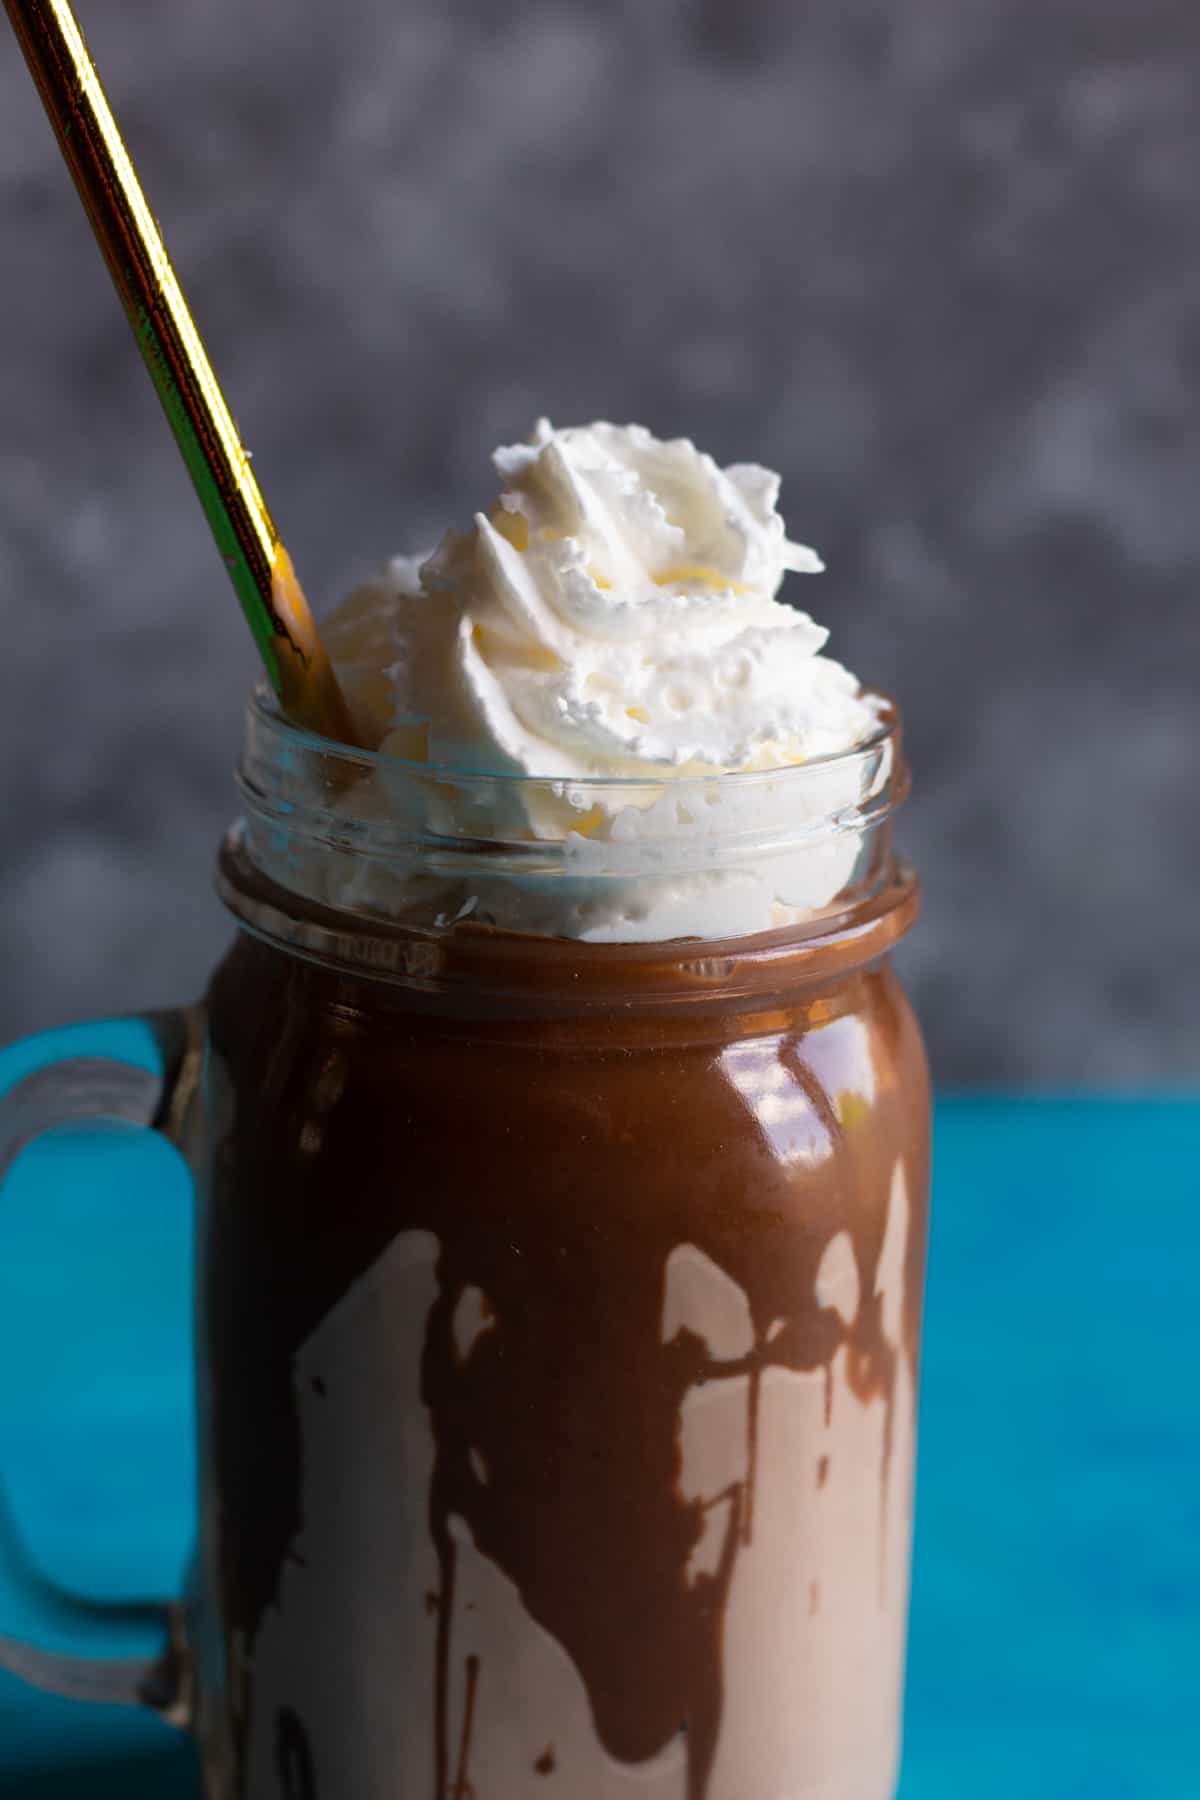 spread nutella inside the glass before pouring the milkshake into it.